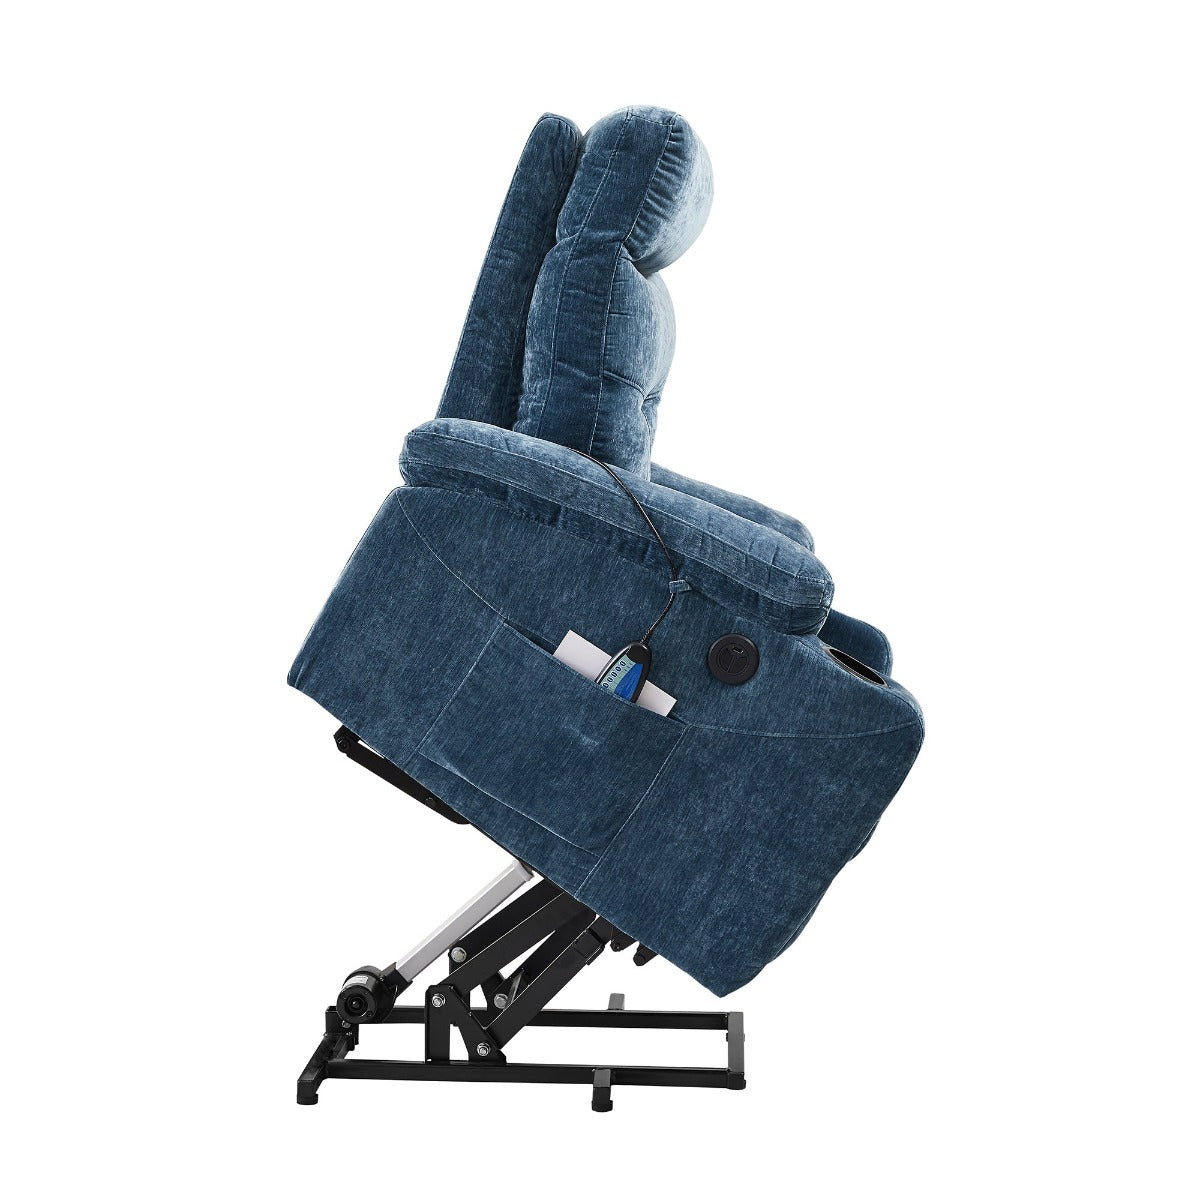 Liyasi Power Lift Recliner Chair with Massage and Heat, lifted side view - My Lift Chair